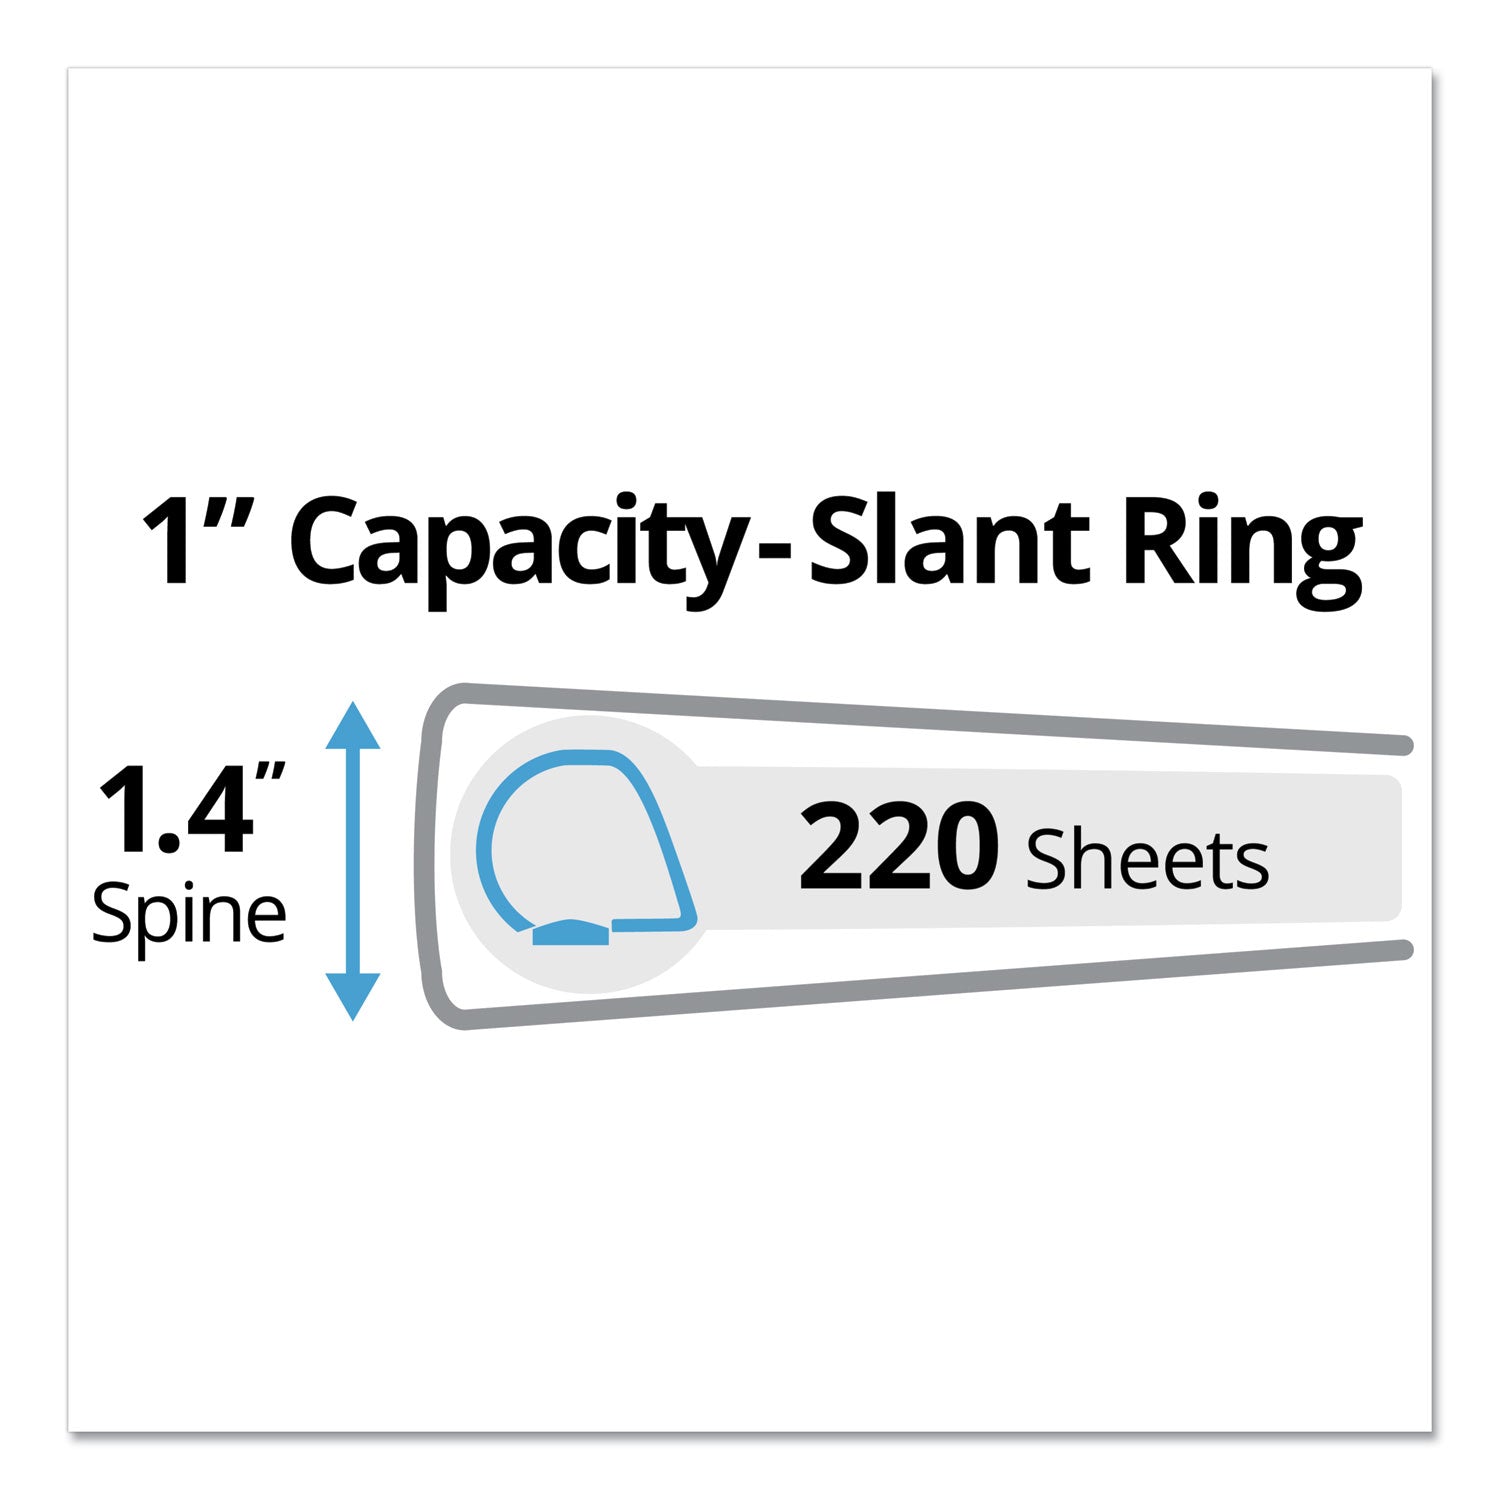 Durable Non-View Binder with DuraHinge and Slant Rings, 3 Rings, 1" Capacity, 11 x 8.5, Black - 